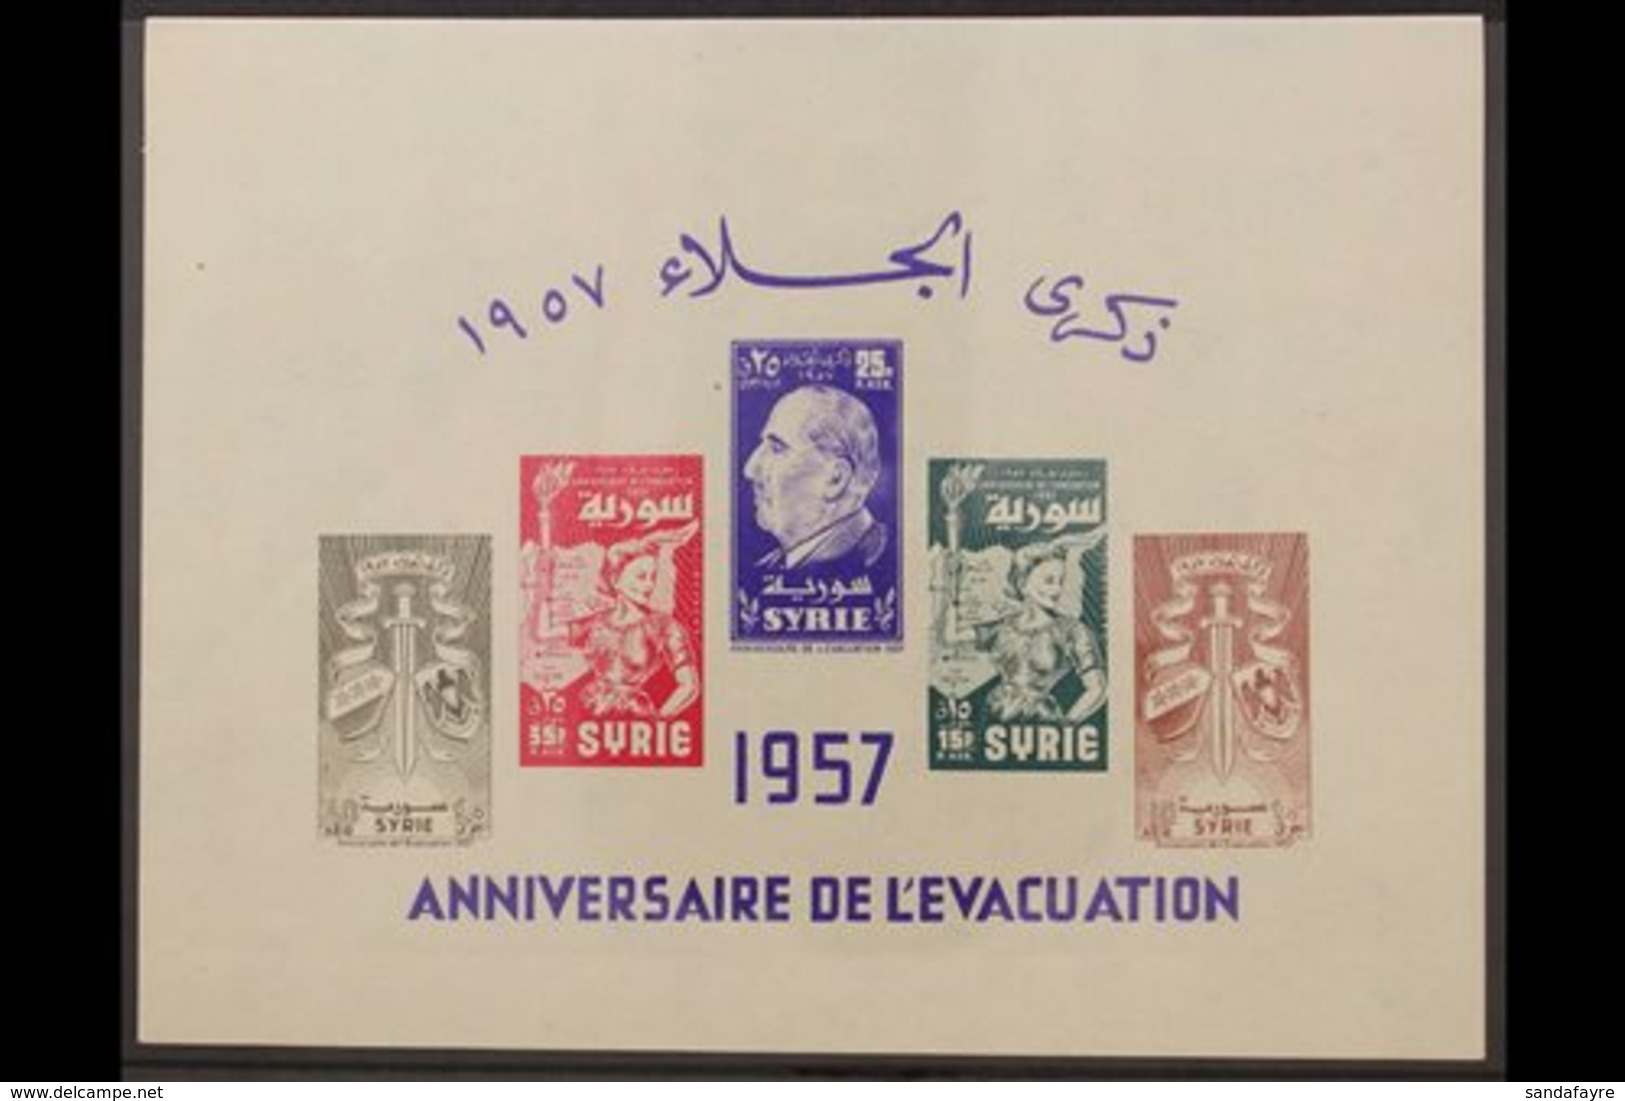 1957 Anniv Of Evacuation Of Foreign Troops Min Sheet, Unl SG, Mi Bl 41, Very Fine Never Hinged Mint. For More Images, Pl - Syrie